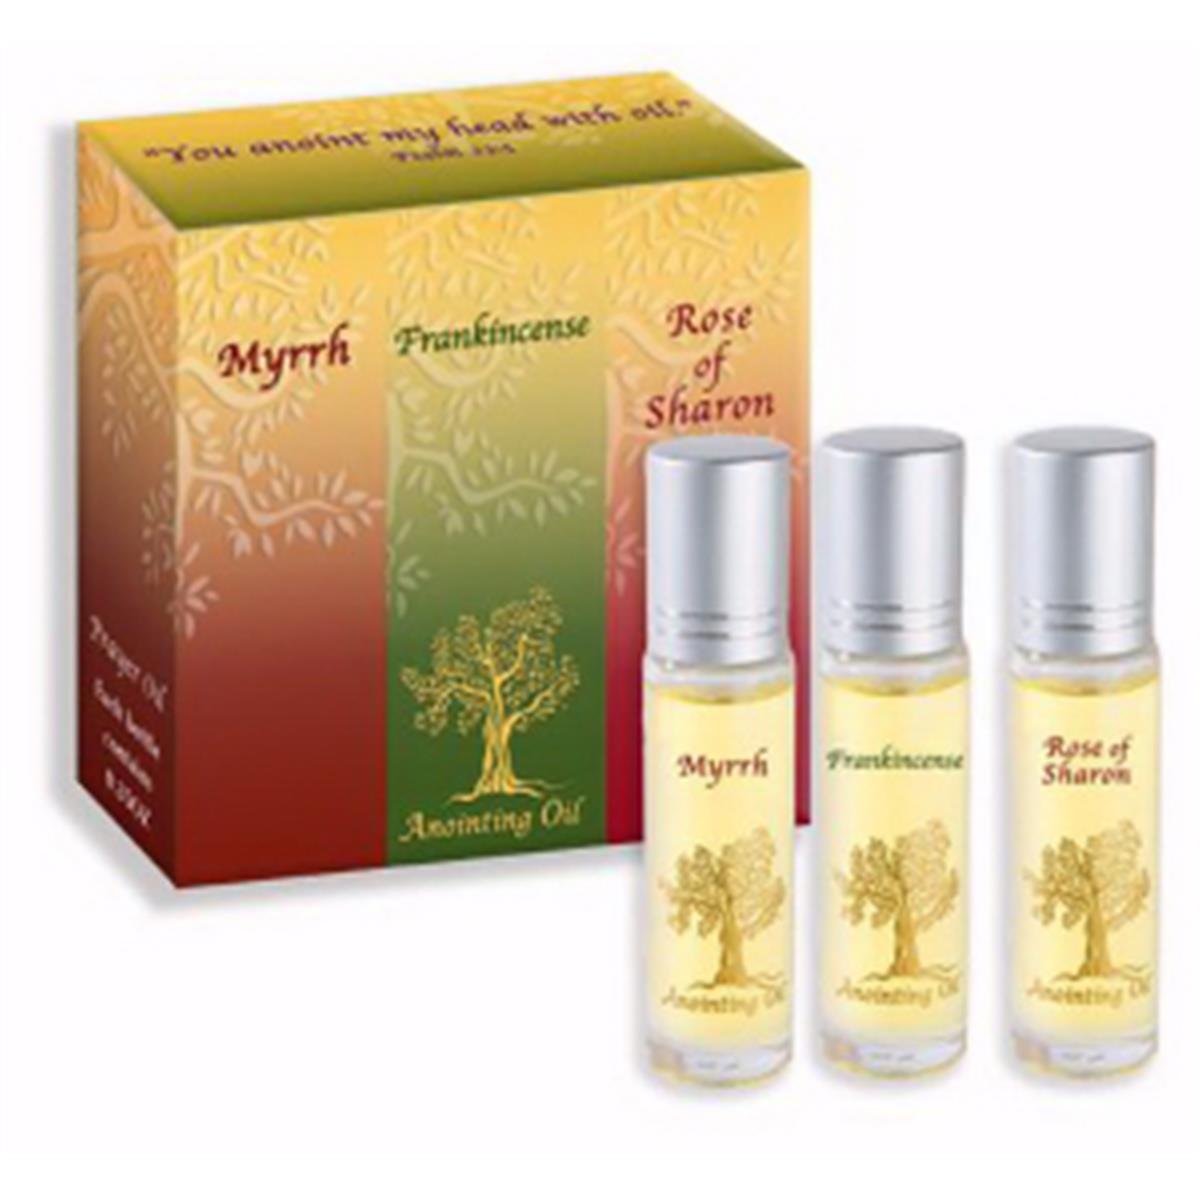 154054 Anointing Oil Set of Three Oils - Frankincense Myrrh & Rose of Sharon -  Holy Land Gifts